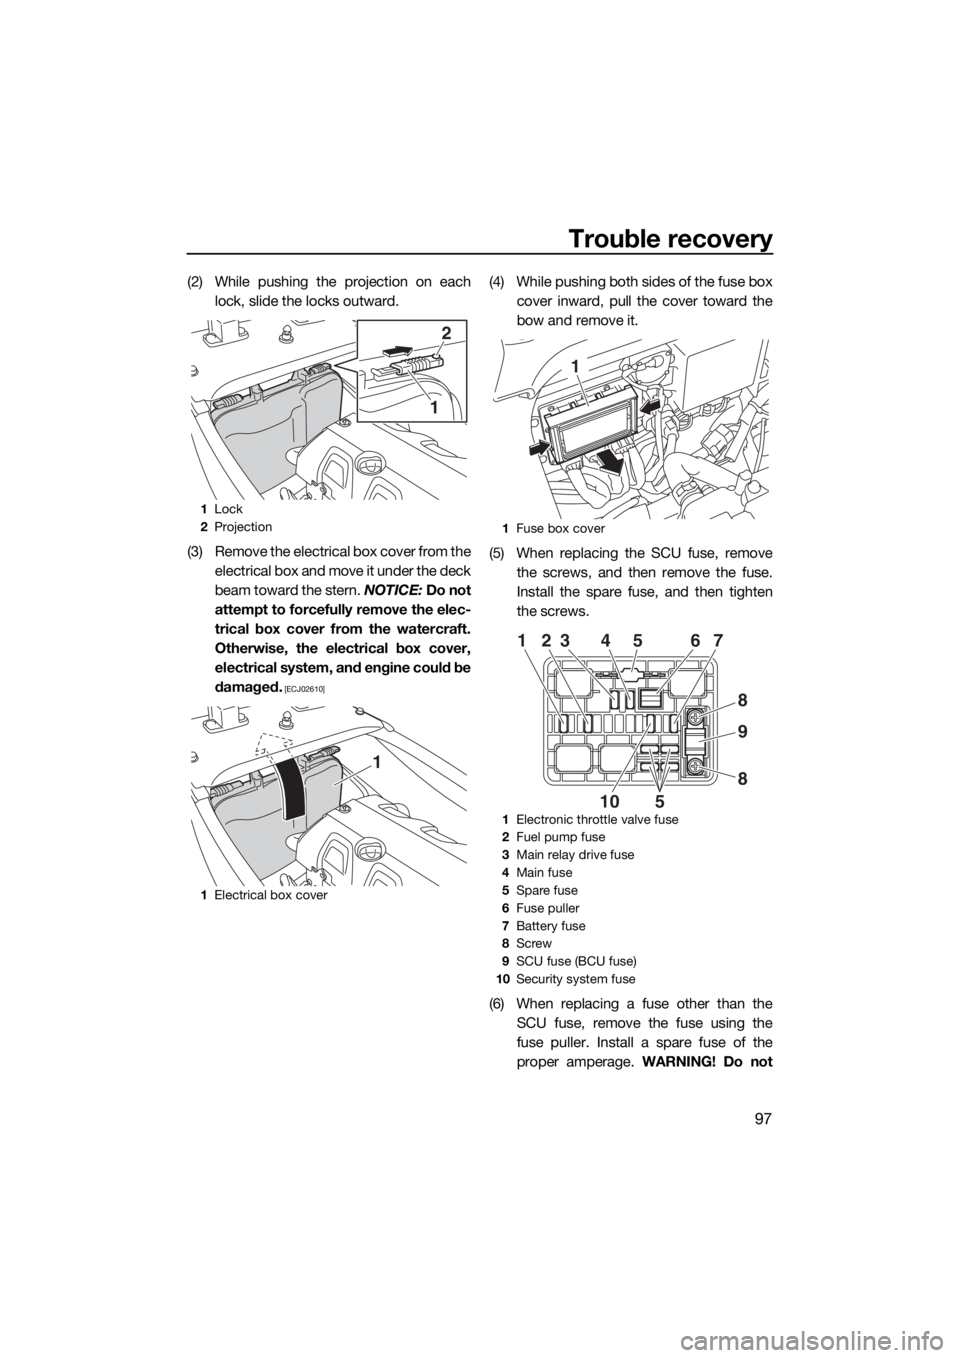 YAMAHA VXR 2015  Owners Manual Trouble recovery
97
(2) While pushing the projection on each
lock, slide the locks outward.
(3) Remove the electrical box cover from the
electrical box and move it under the deck
beam toward the stern